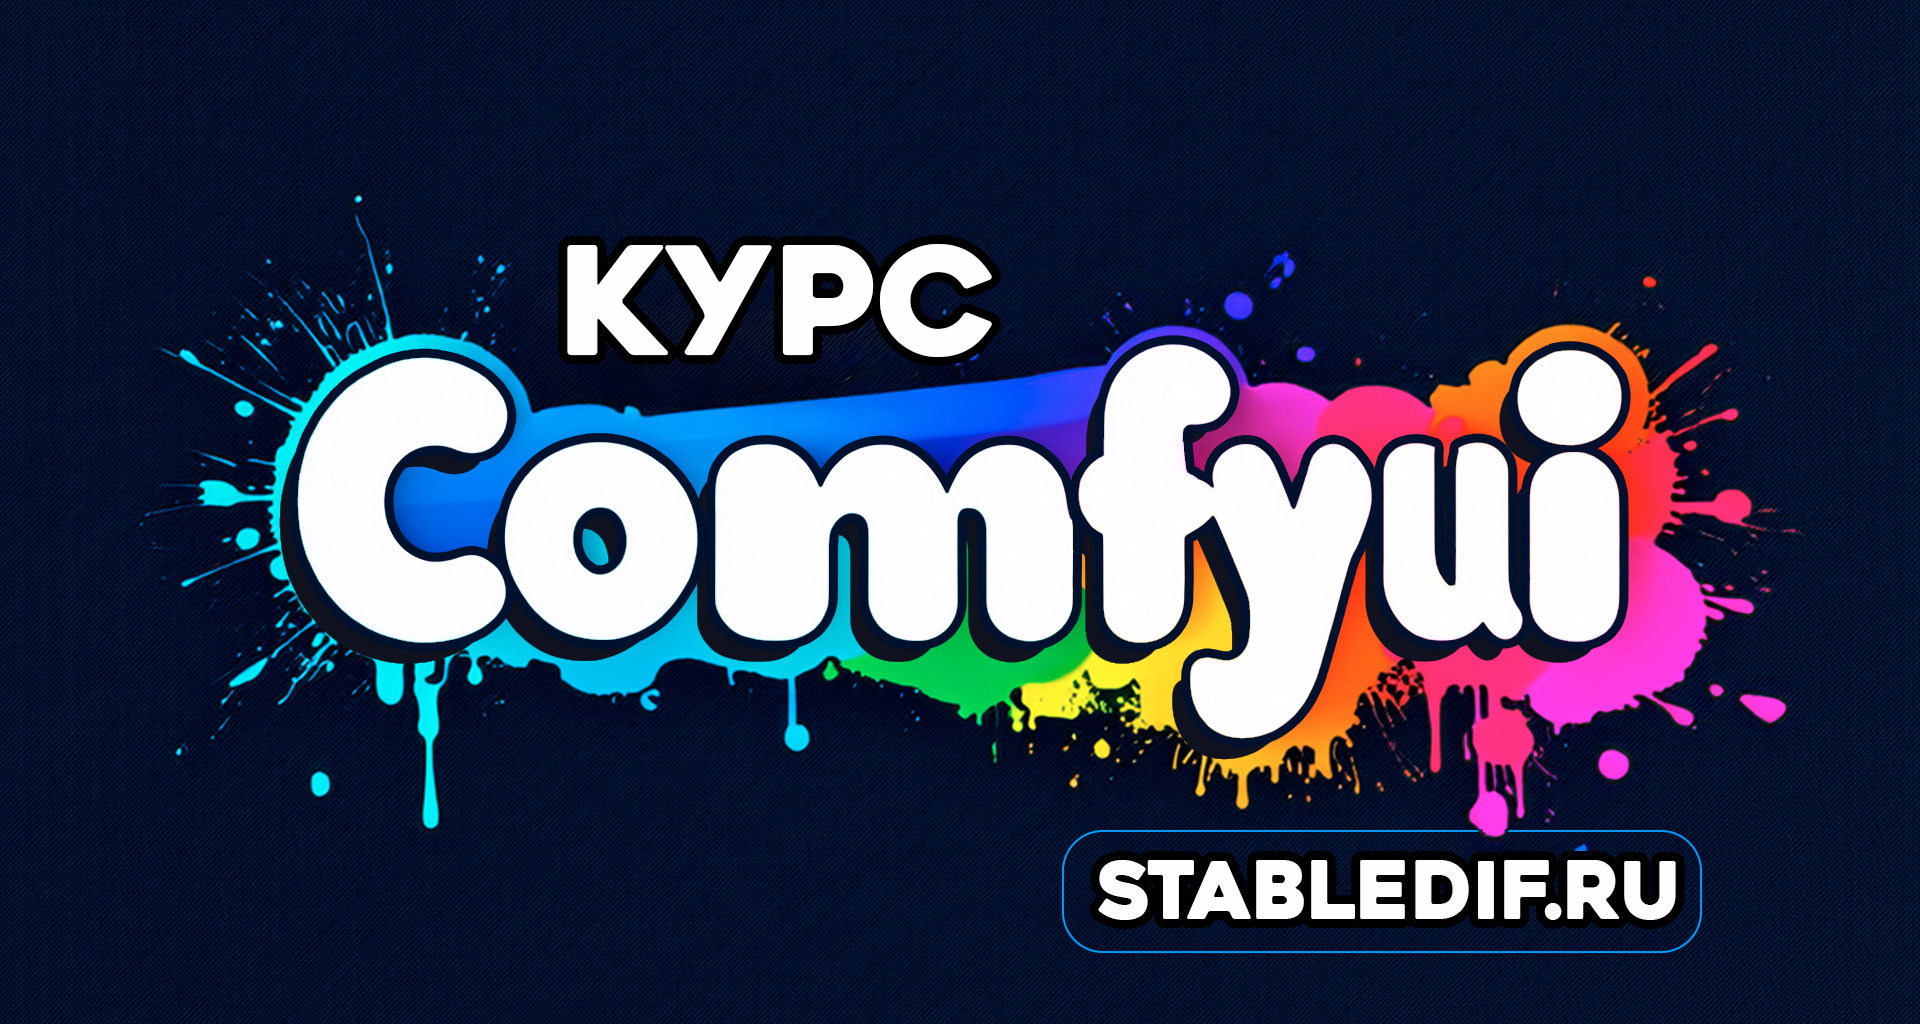 COMFYUI / LAUNCHING A NEW COMFYUI COURSE - Design, 3D, 2D, Desktop wallpaper, Designer, Dall-e, Stable diffusion 3, Stable diffusion, Art, Chat Bot, Digital, Retouch, Comfy, Youtube, Python, Testing, Computer graphics, Artificial Intelligence, My